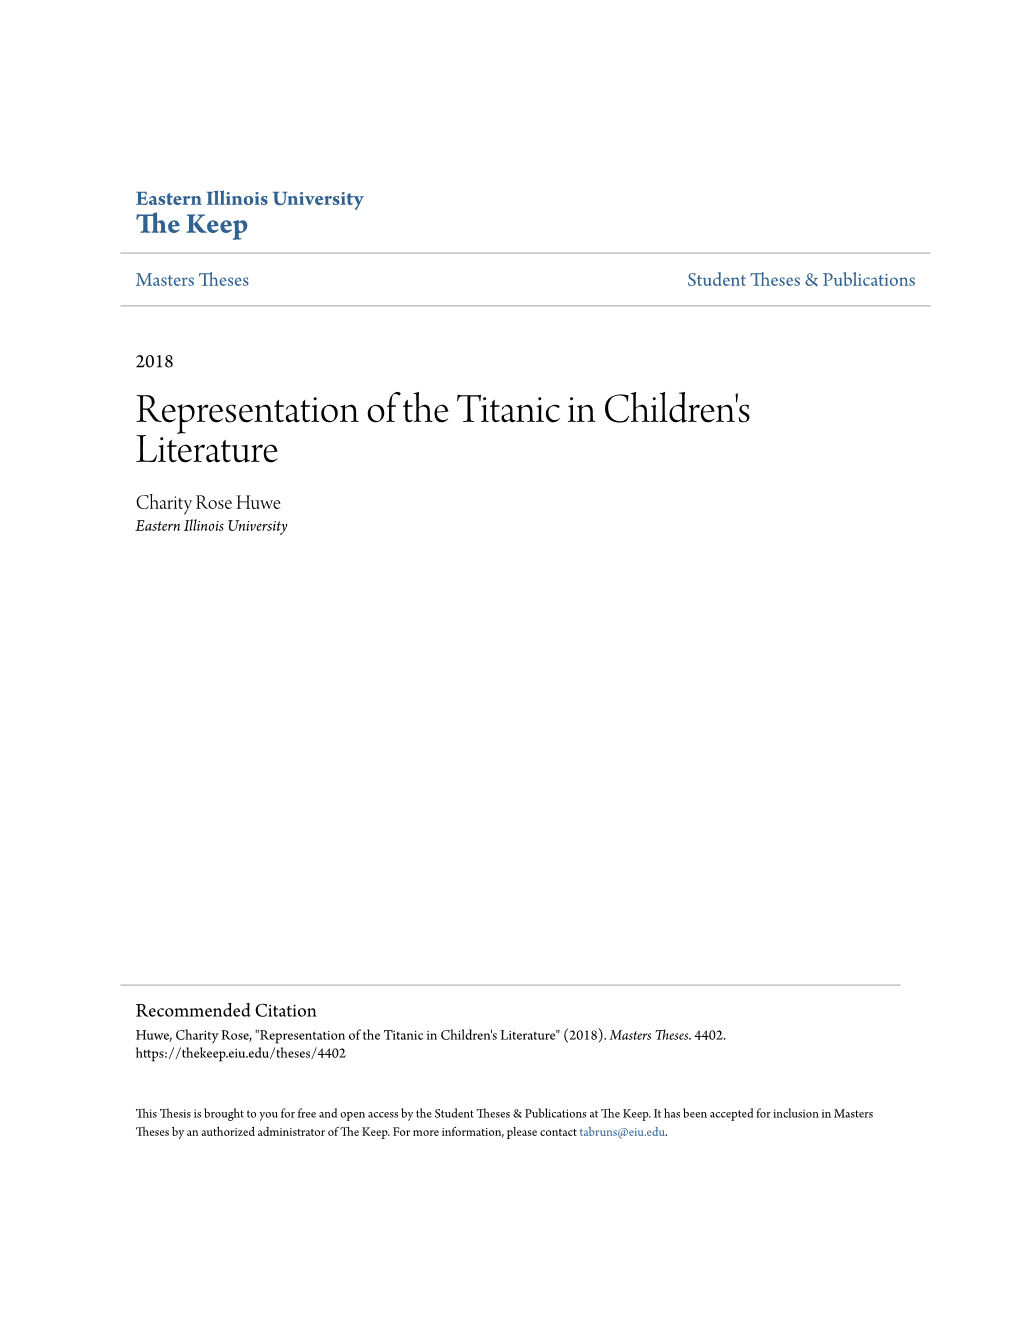 Representation of the Titanic in Children's Literature Charity Rose Huwe Eastern Illinois University